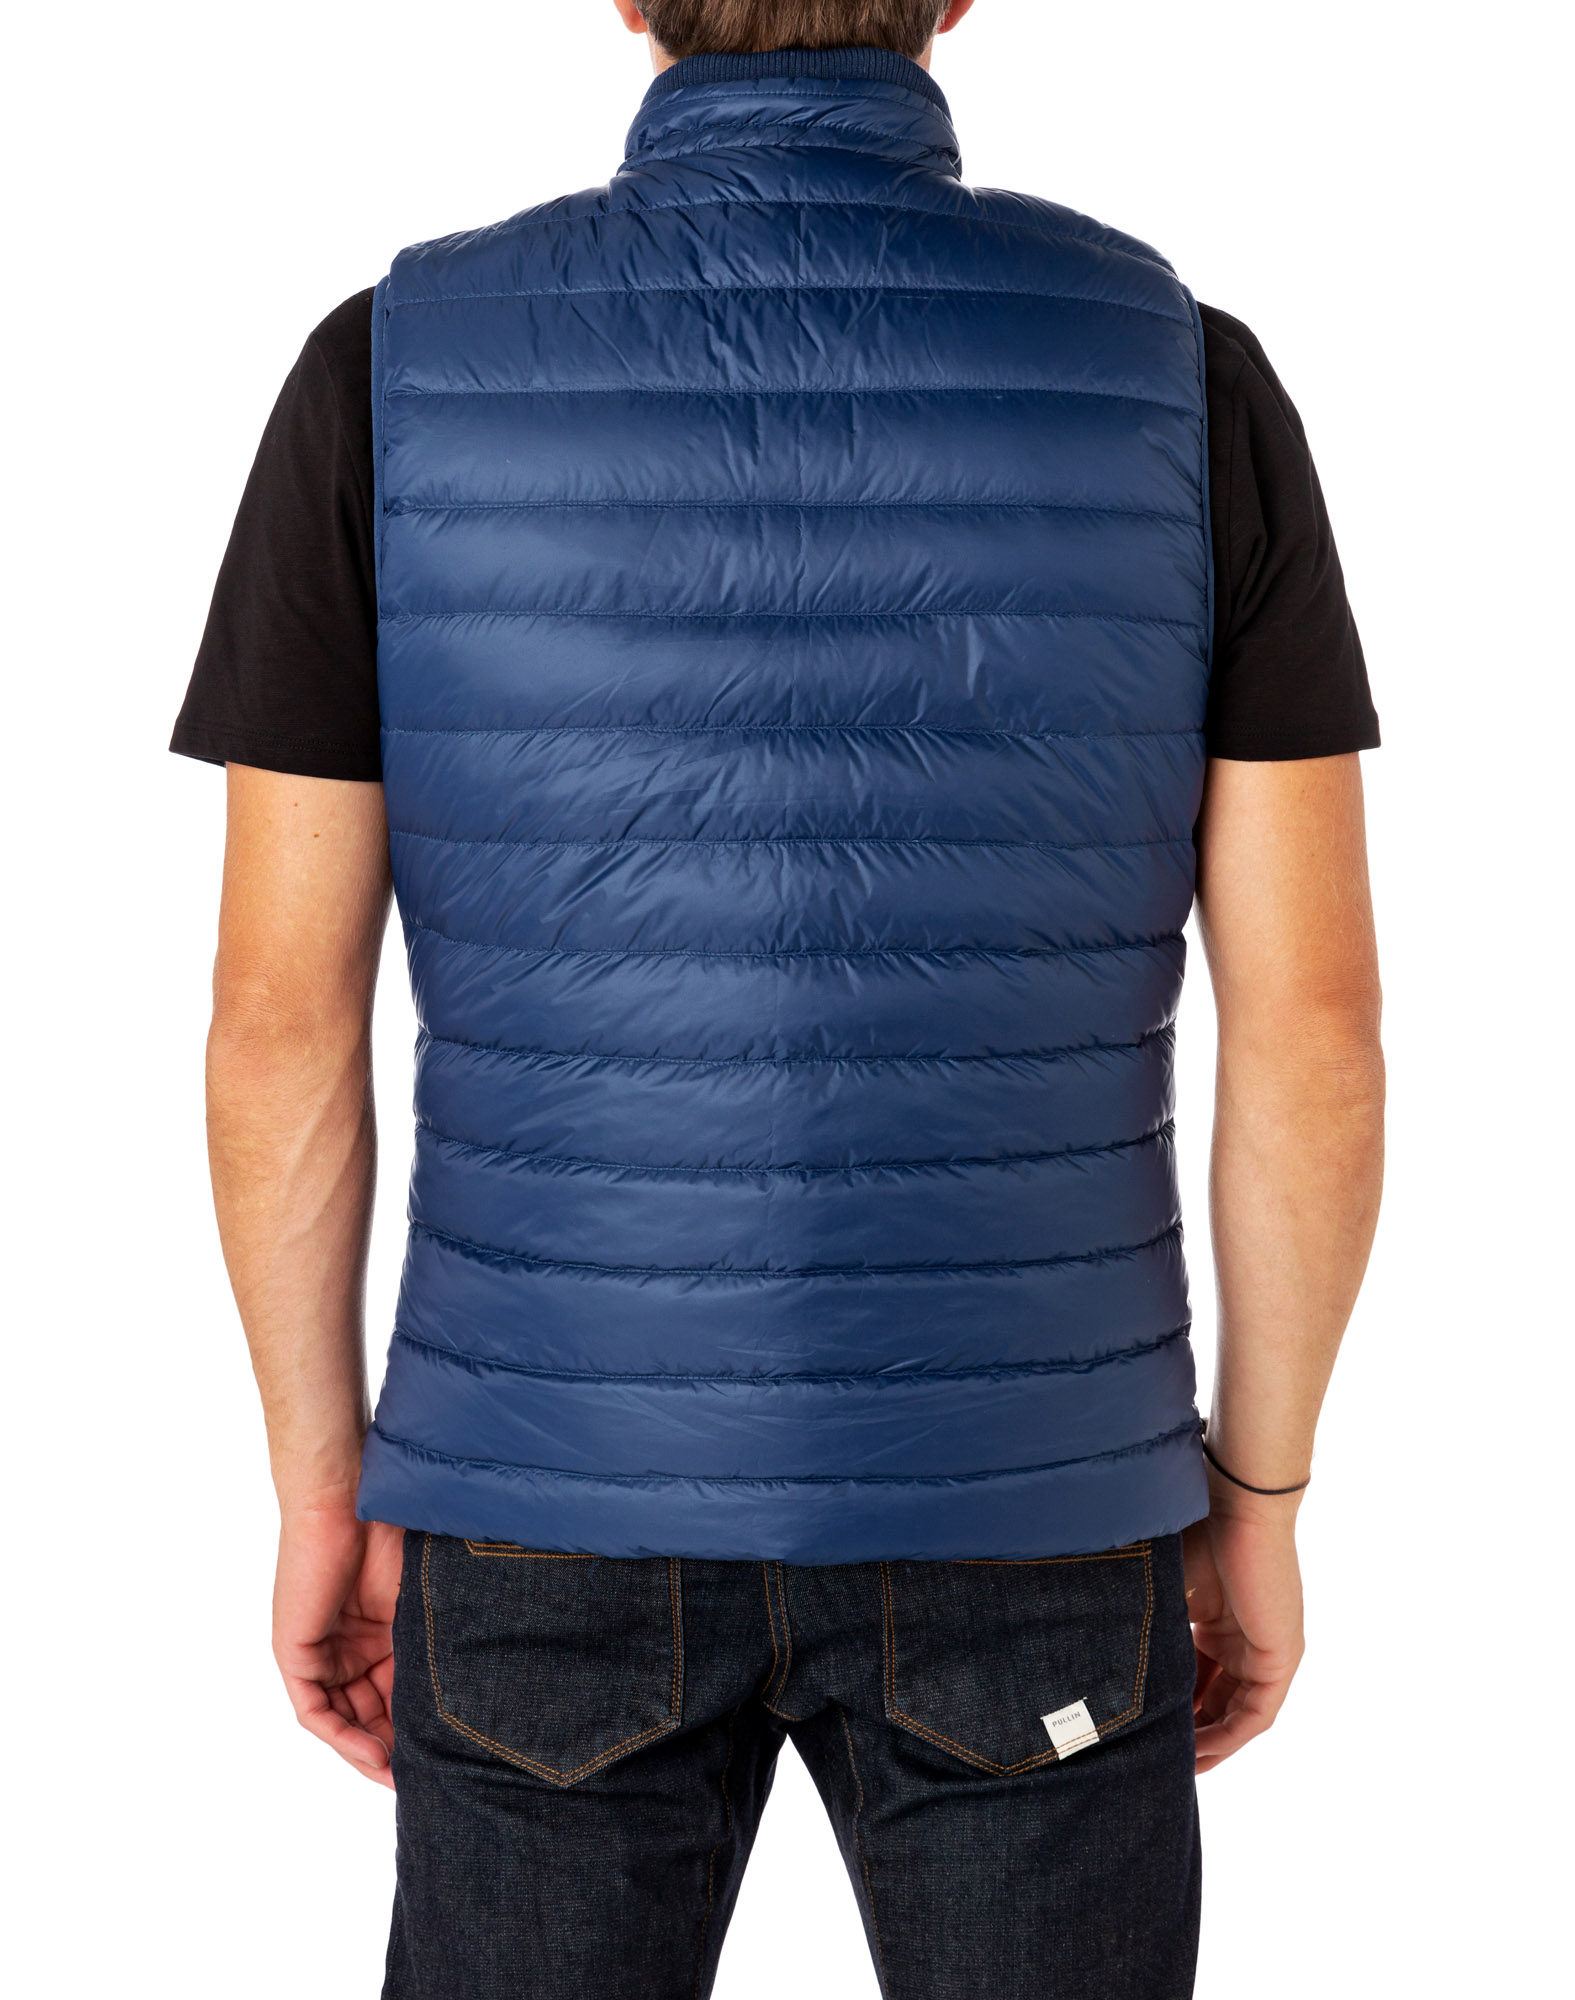 Men's feather jacket without sleeves COCO